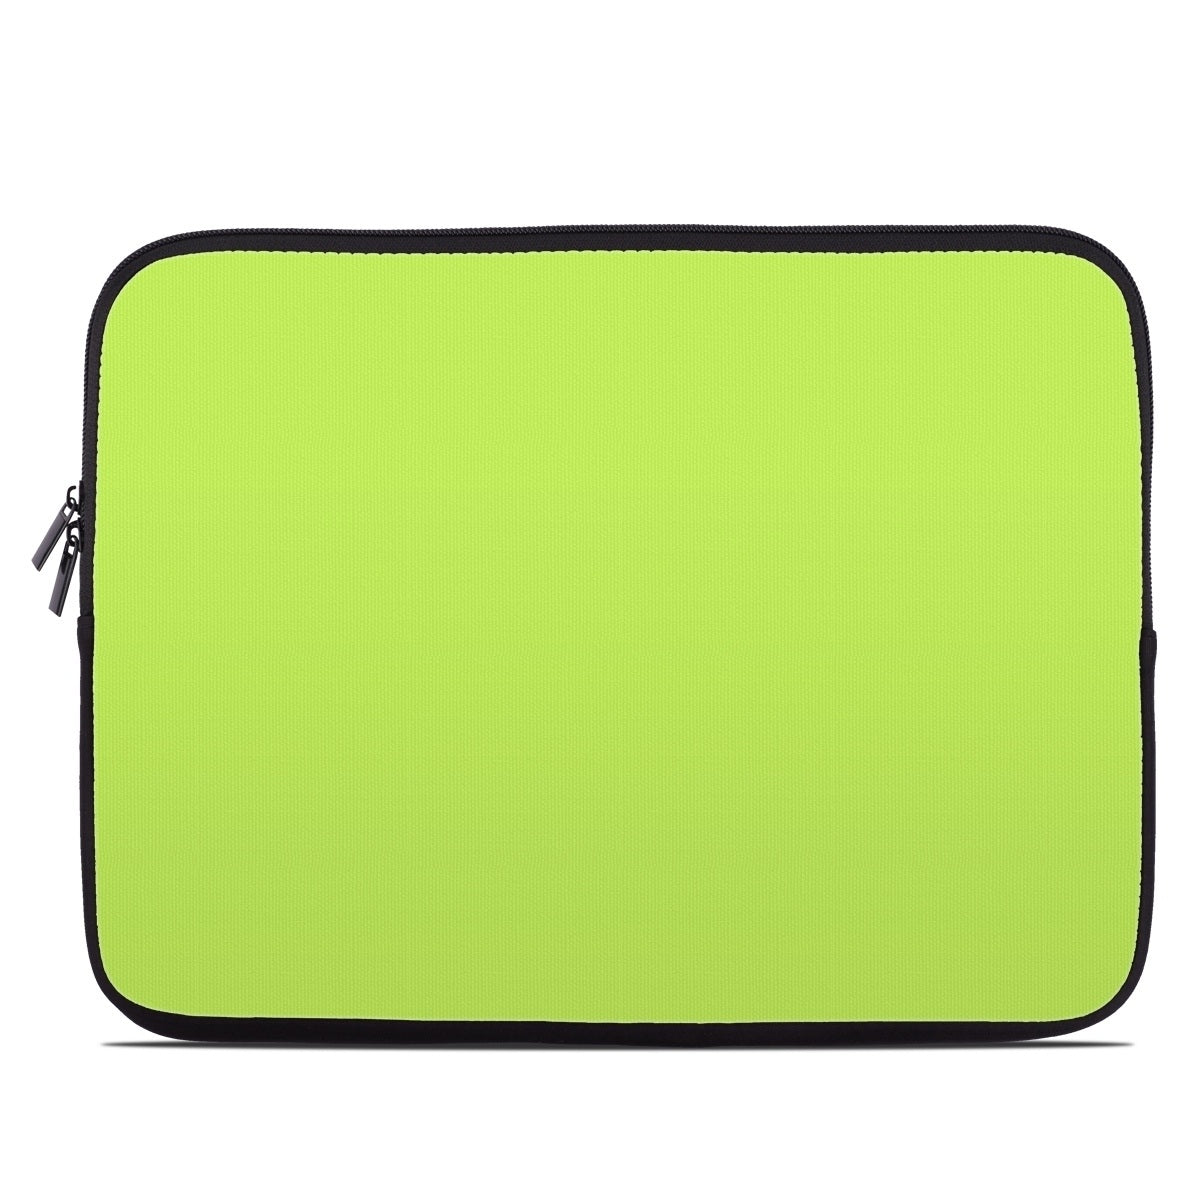 Solid State Lime - Laptop Sleeve